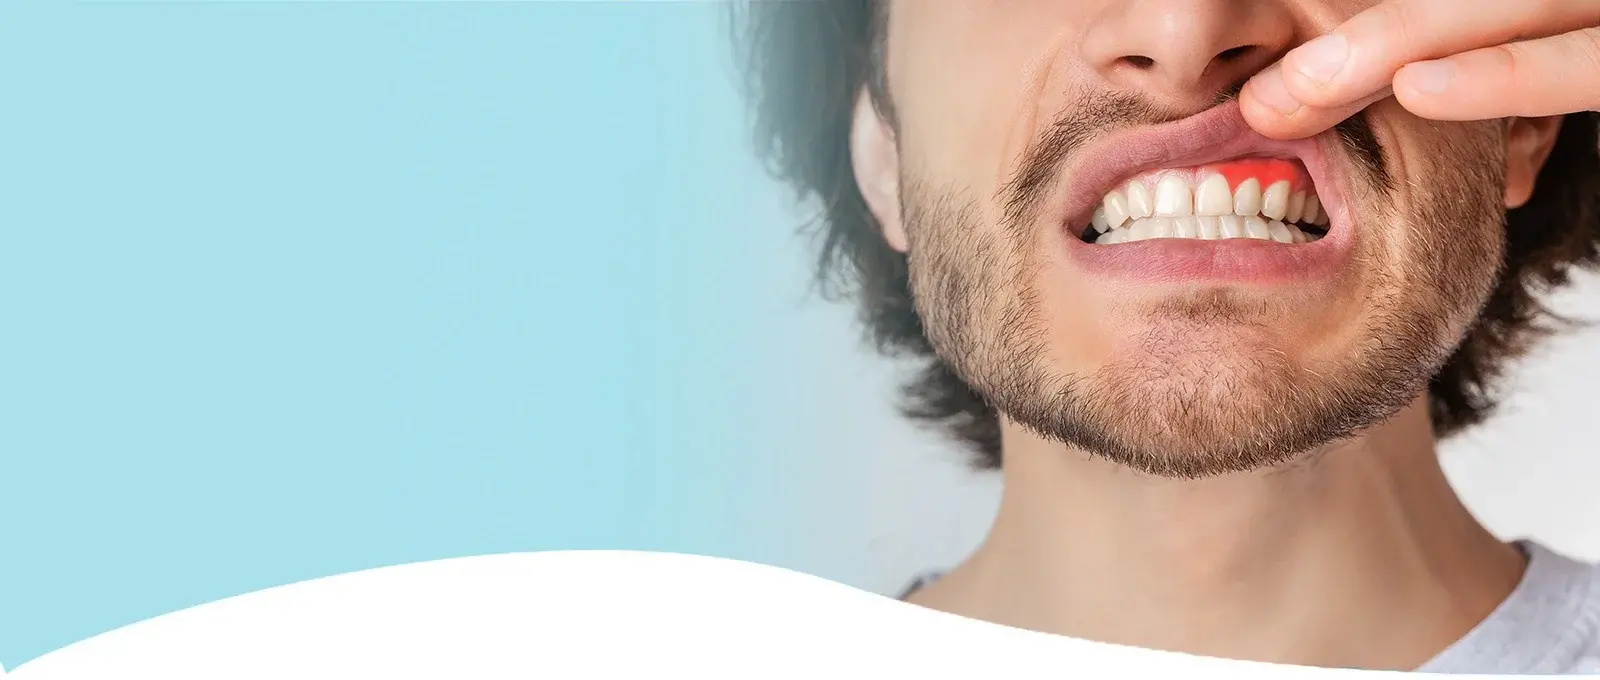 Elevate your Gum Health with treatments at West Lynde Dental in Whitby, prioritizing your comfort